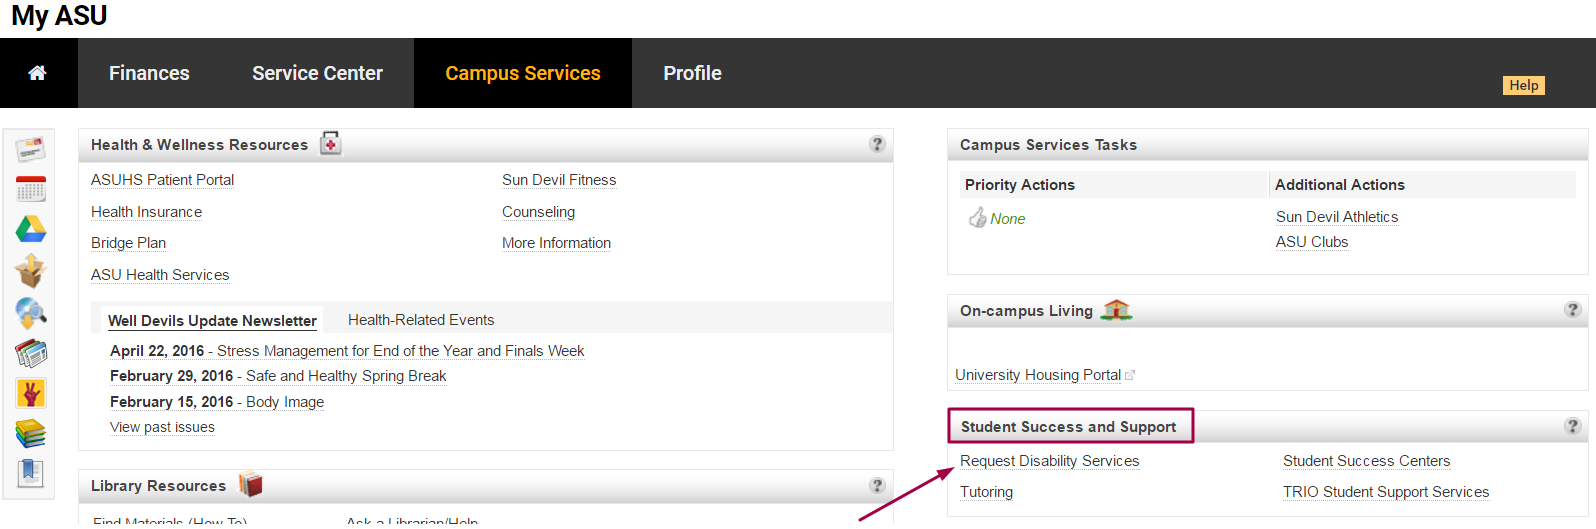 My ASU Portal> Campus Service Tab > Student Success & Support box> Request Disability Services